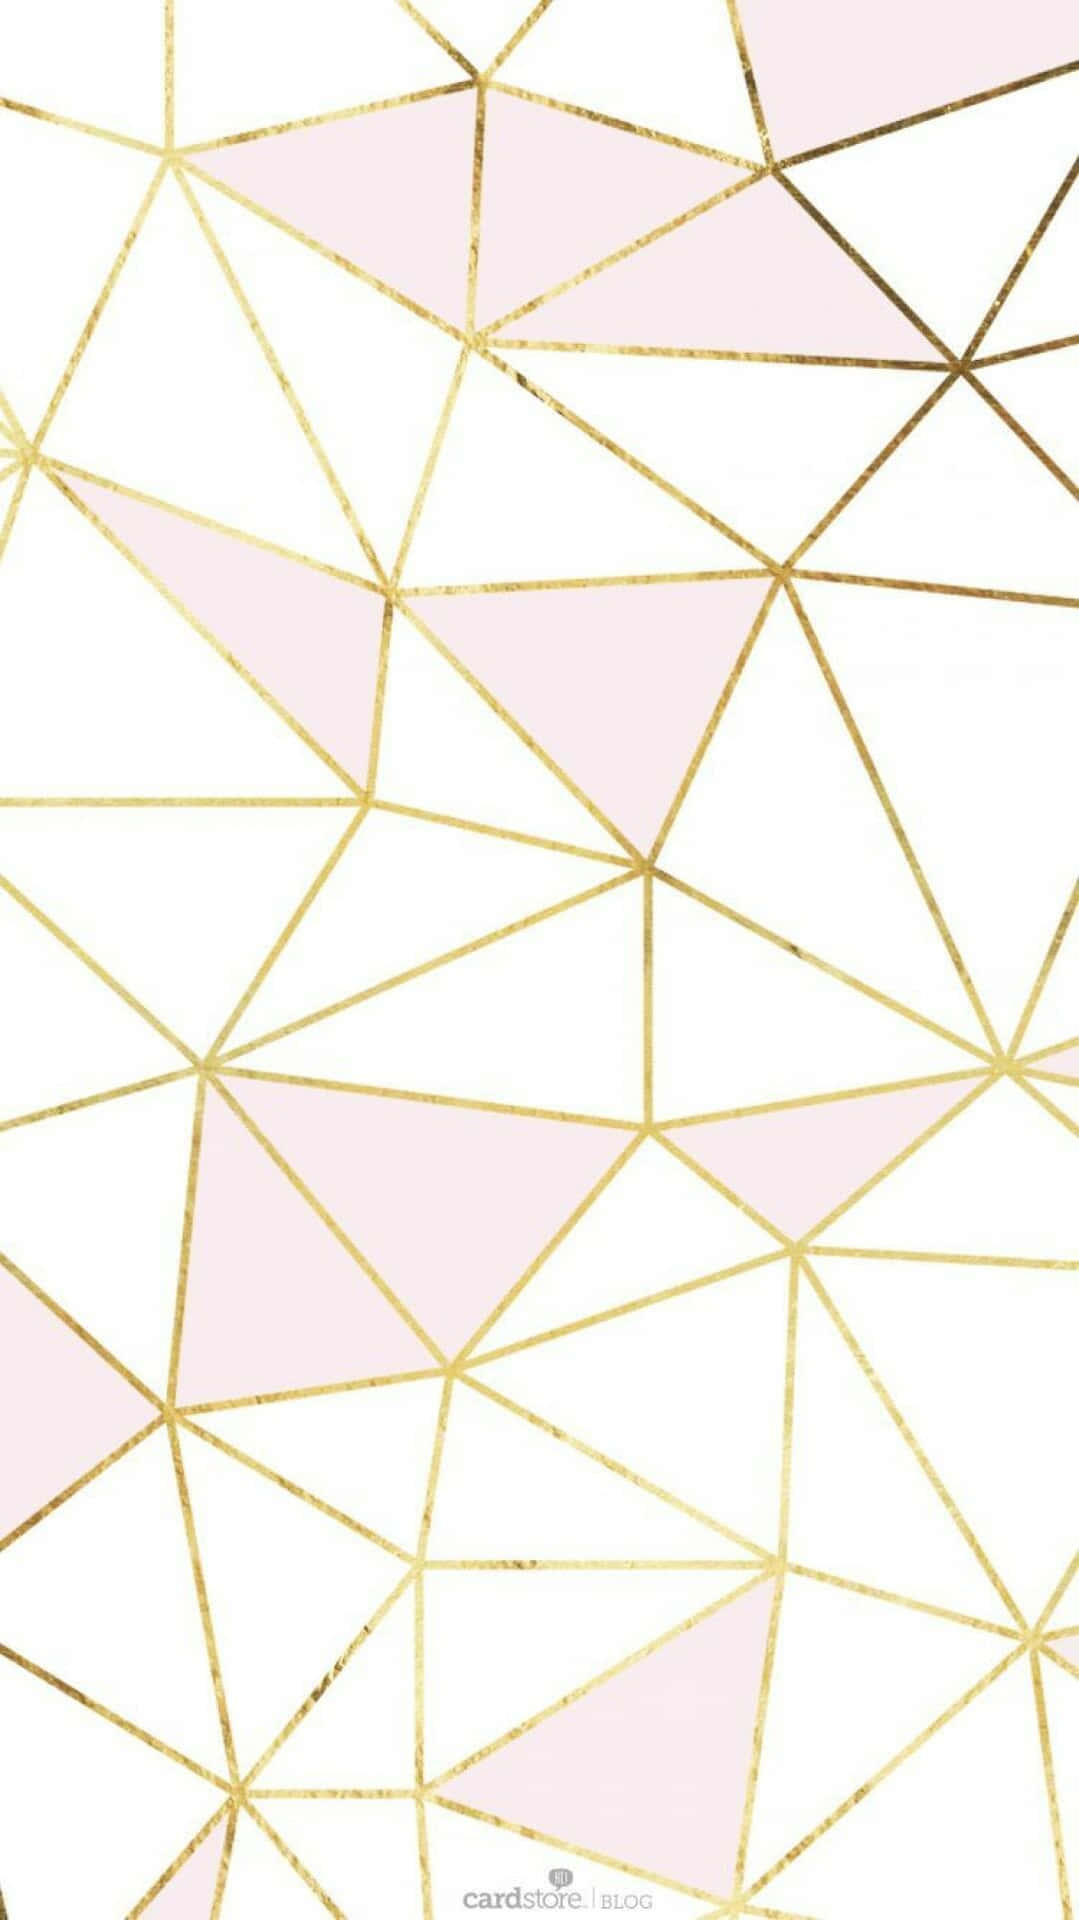 Show off your style with this unique geometric iPhone wallpaper Wallpaper